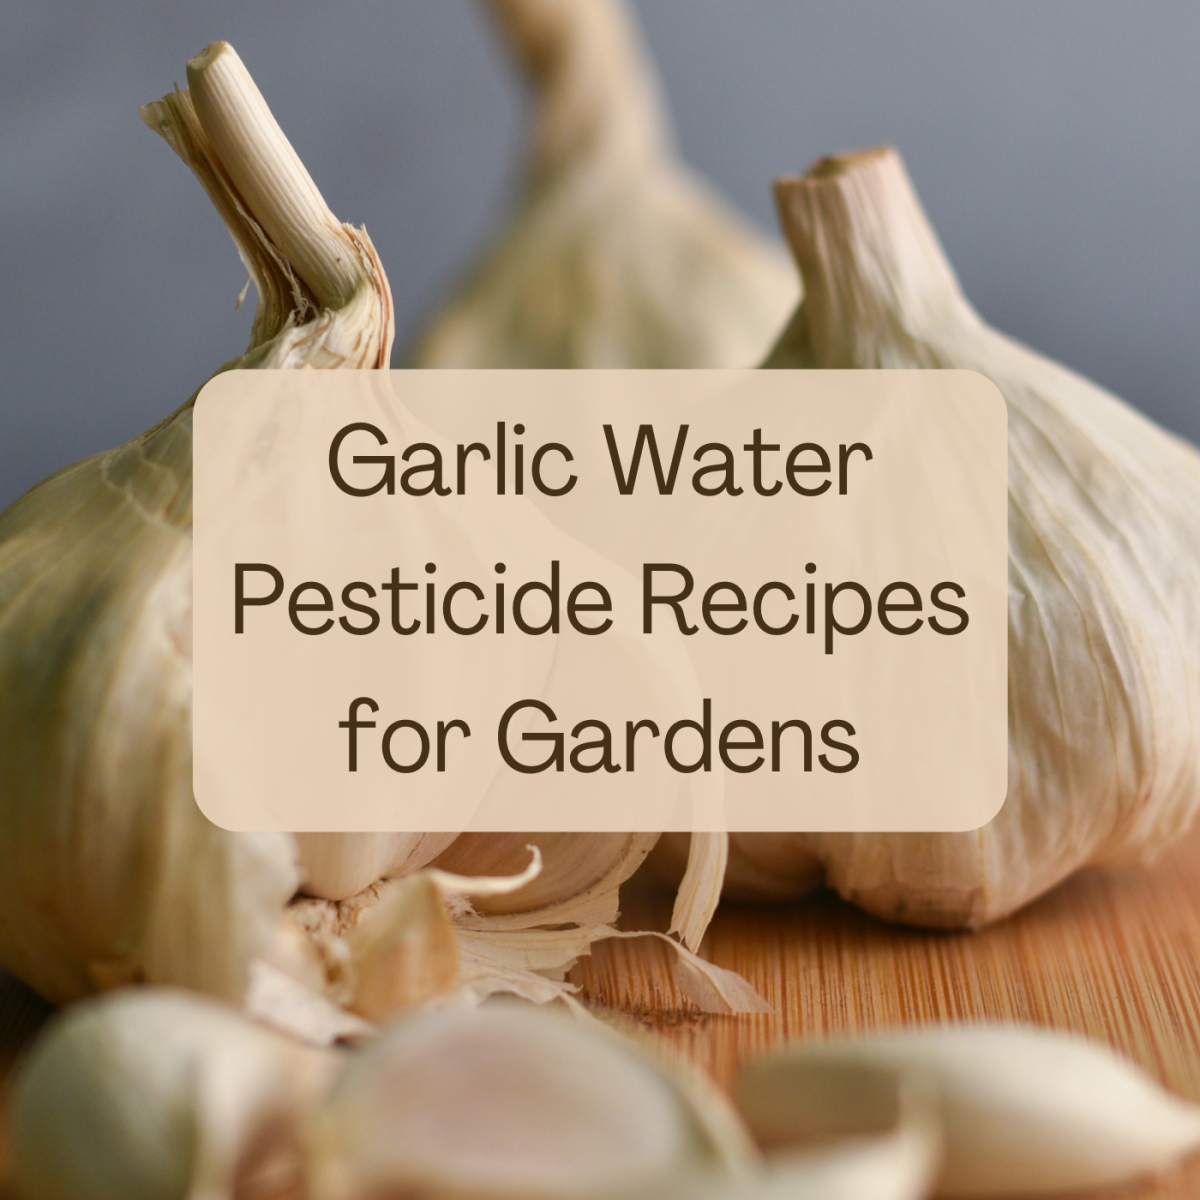 Learn how to make a natural, organic—and effective!—pest deterrent spray for your garden using garlic water.